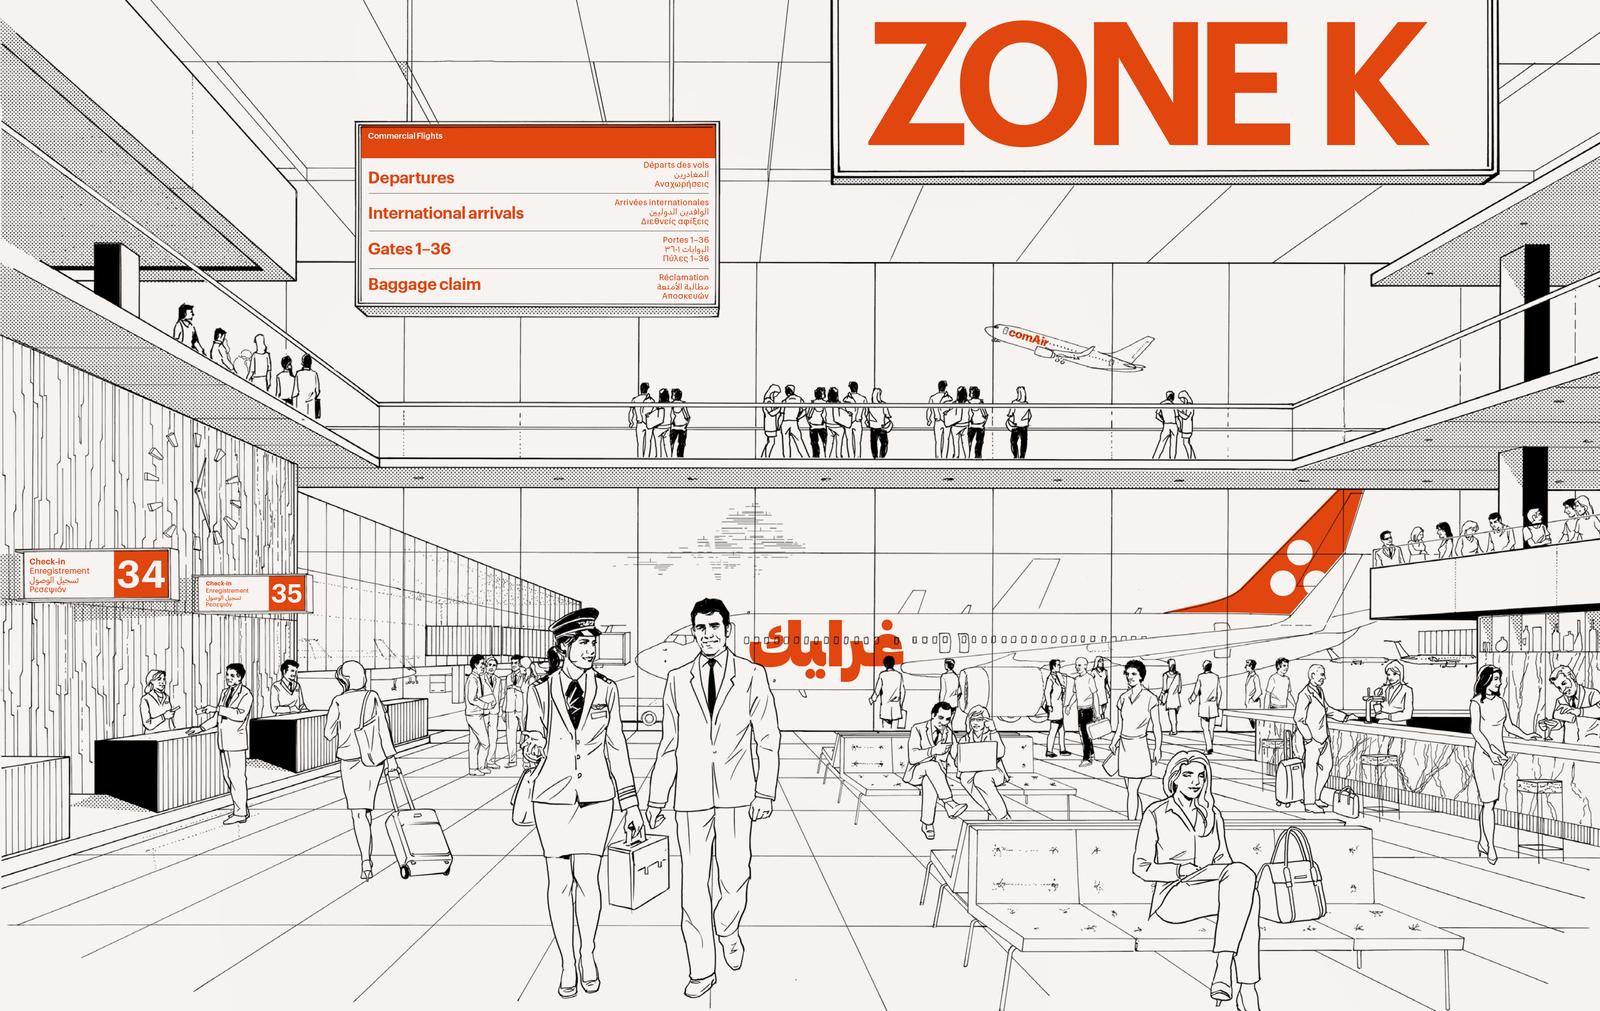 Spread from Graphik specimen booklet, showing people in an airport terminal with text on signs in English, French, Greek, and Arabic.